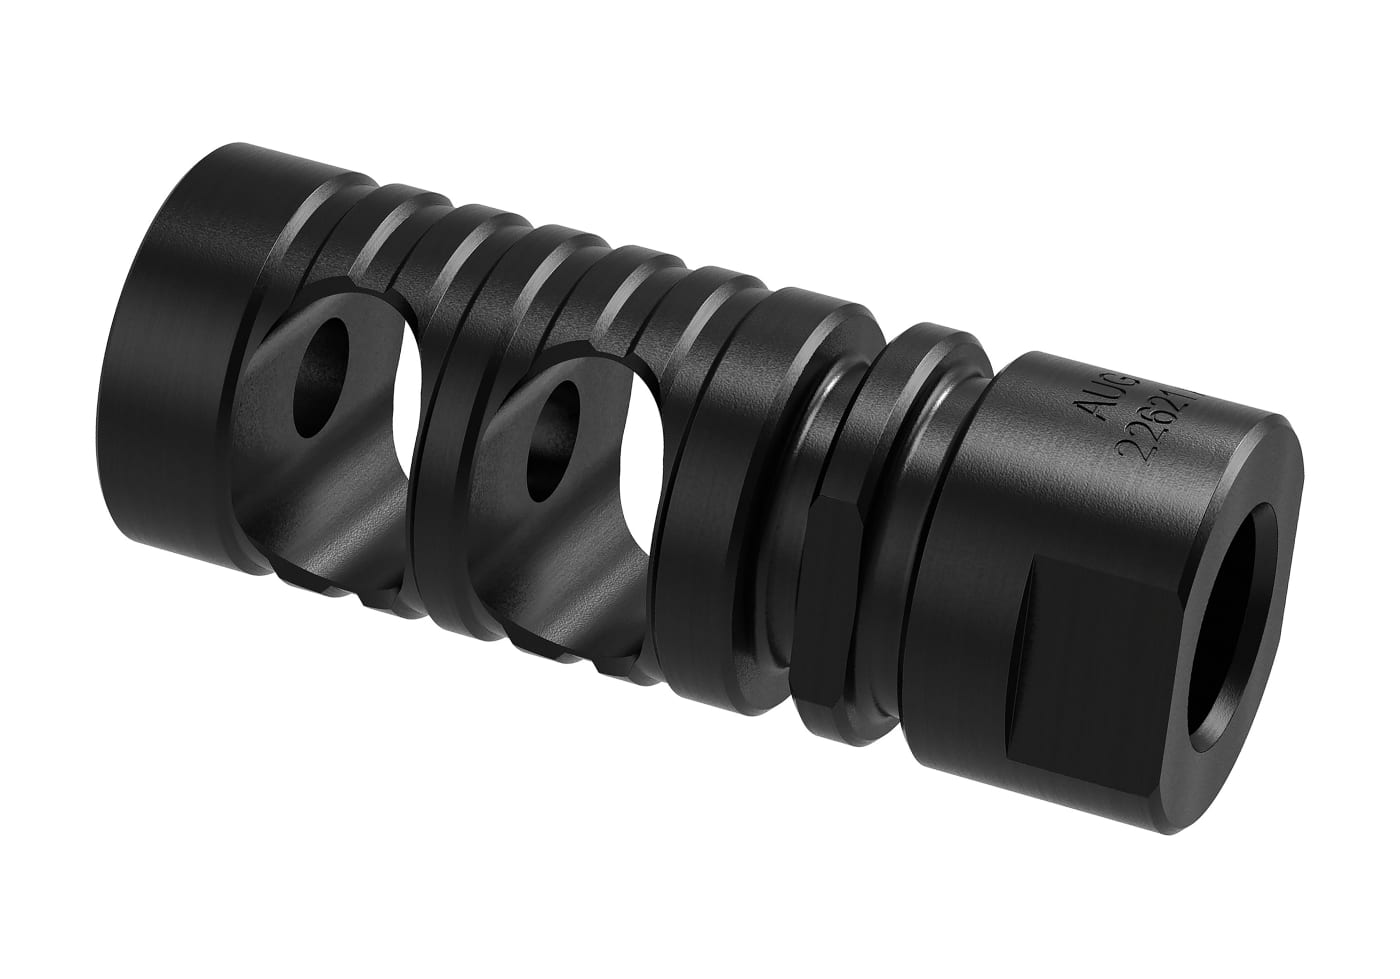 Clawgear AUG Two Chamber Compensator